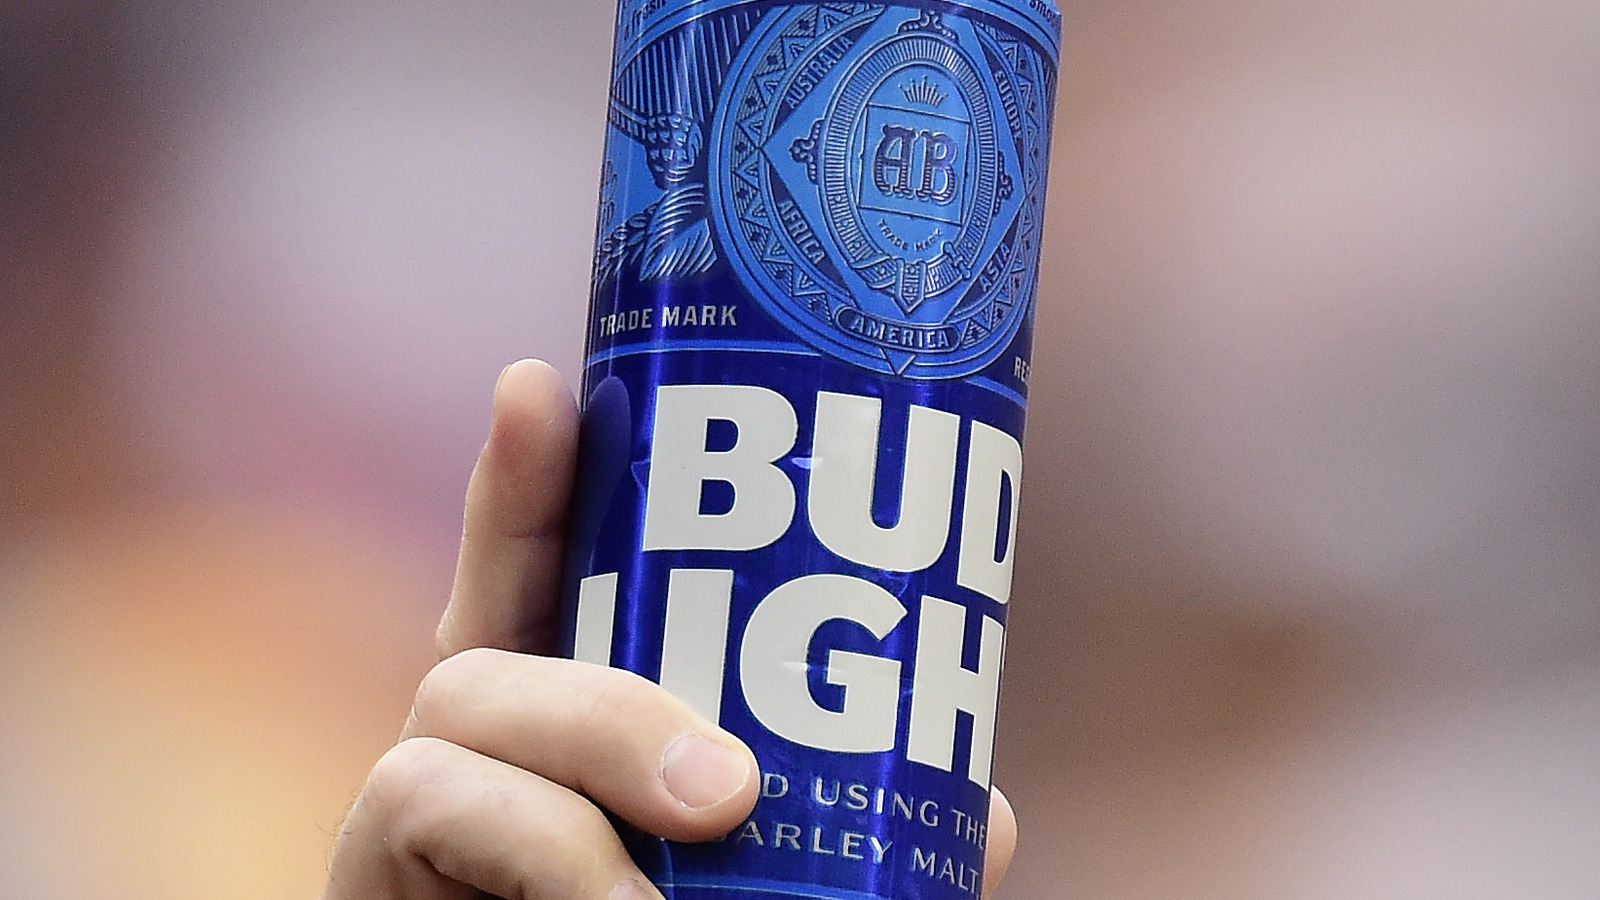 The Song In Bud Light's Super Bowl 2022 Commercial Pays Tribute To A